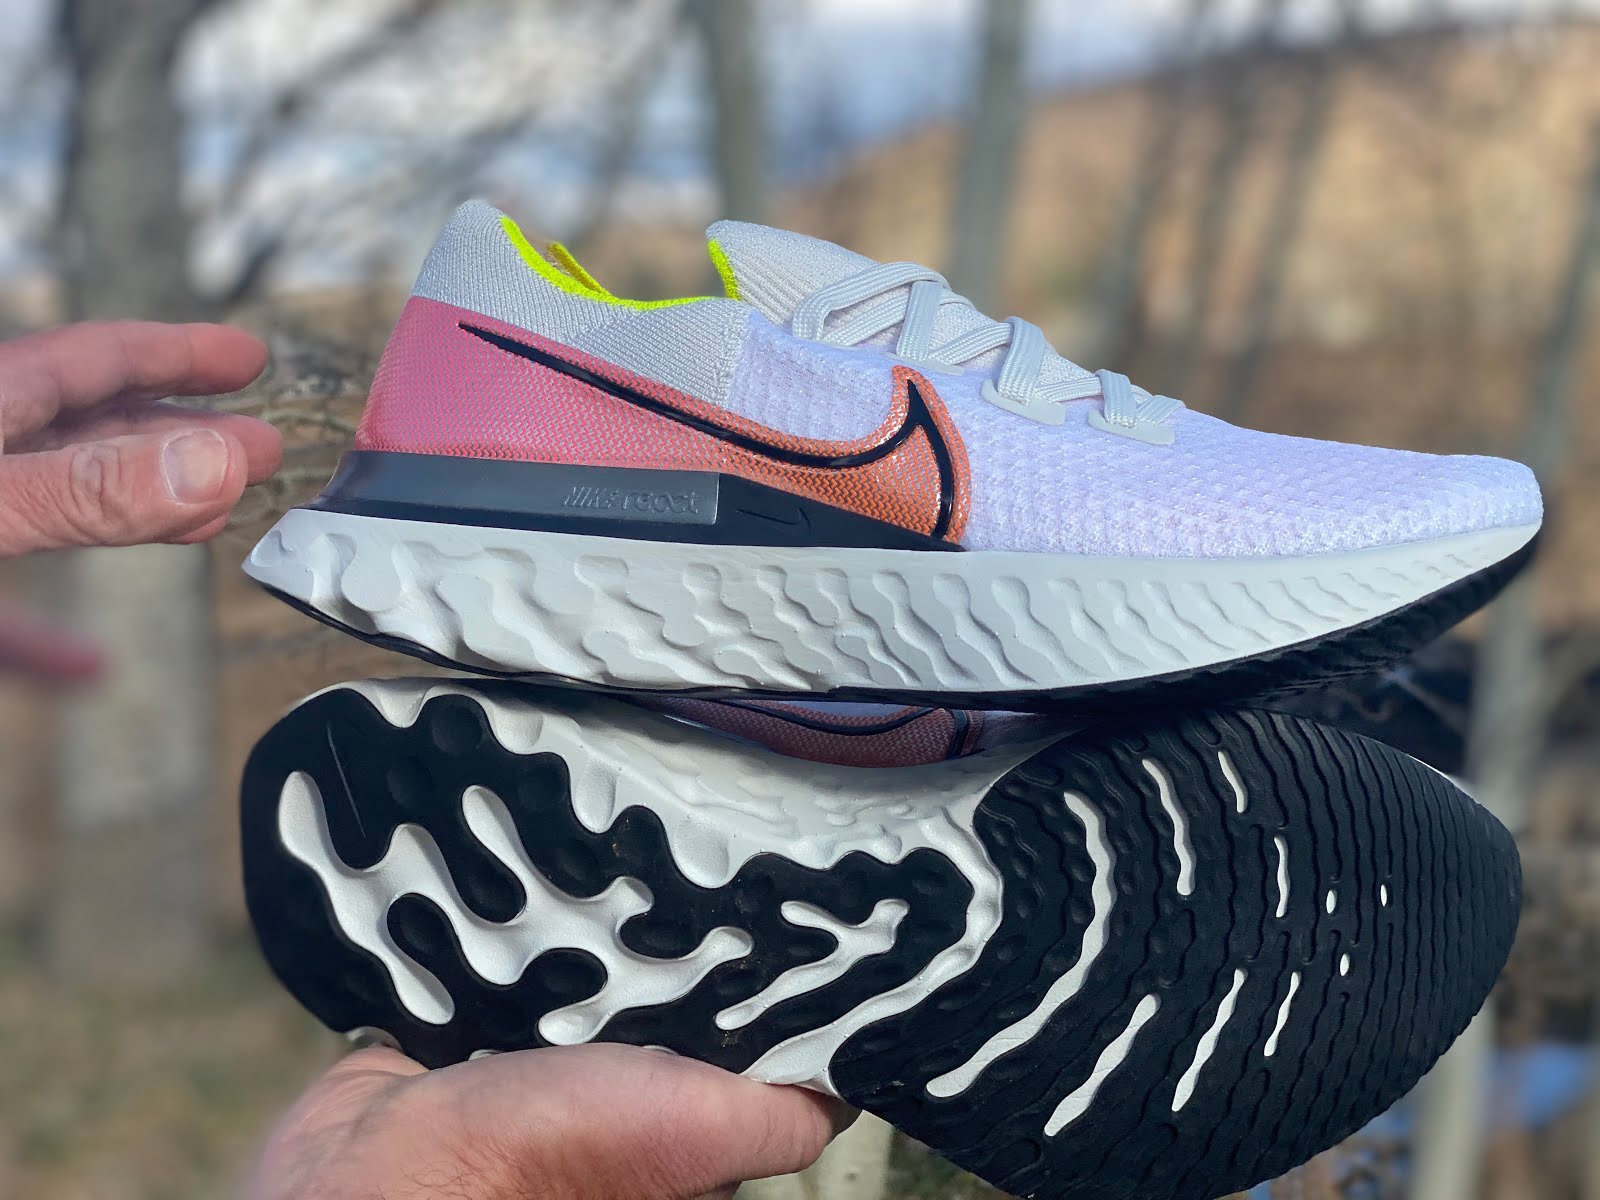 Road Trail Run: Nike React Infinity Run Flyknit Initial Run Impressions  Video Review and Shoe Details